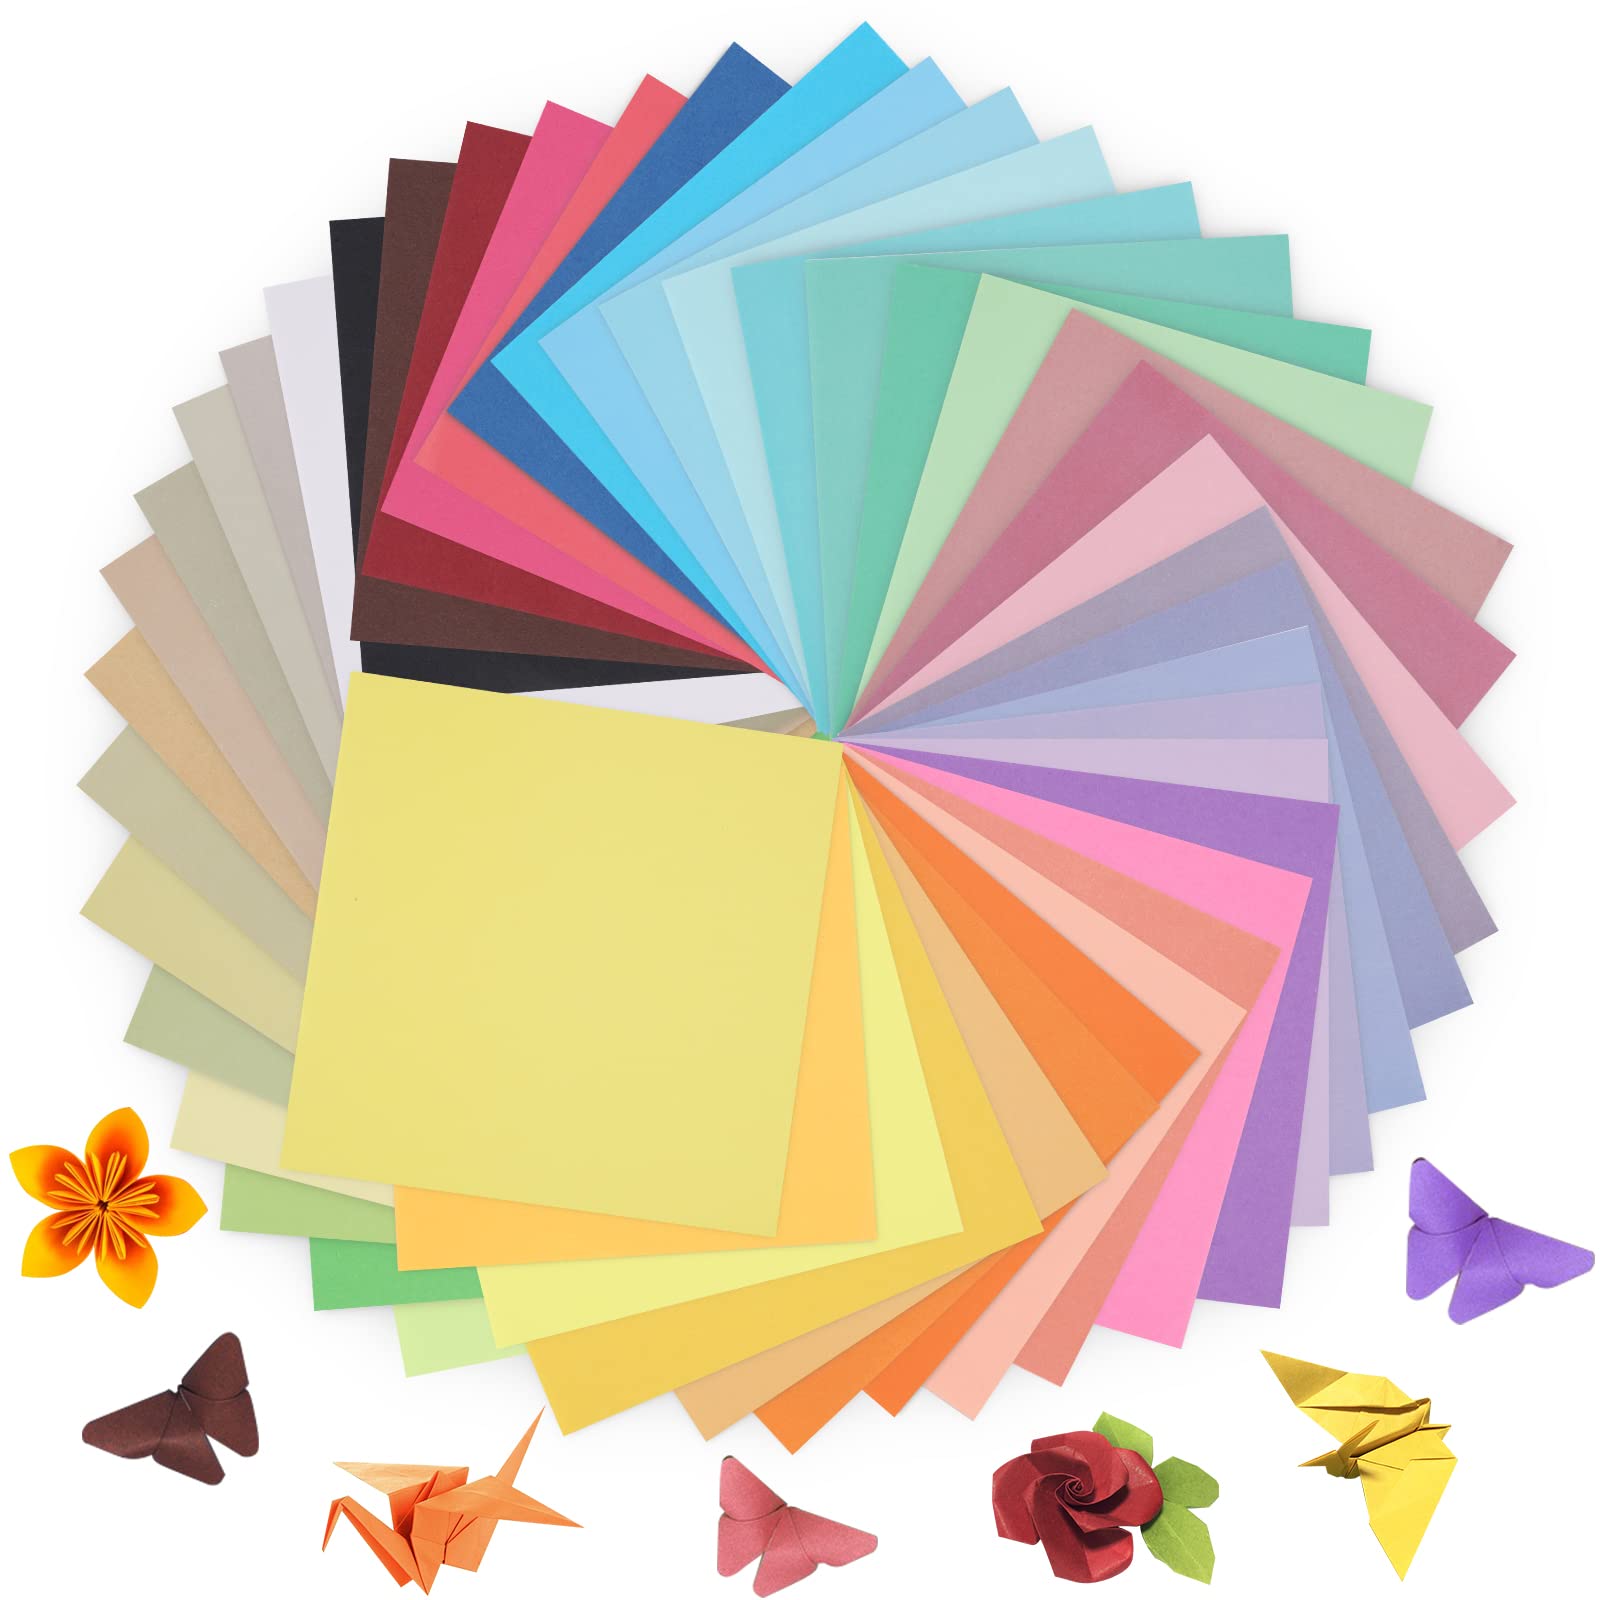 Origami Paper 50 Colors 100 Sheets 6 x 6 - Double Sided Color Origami Kit  for Crafts & Art